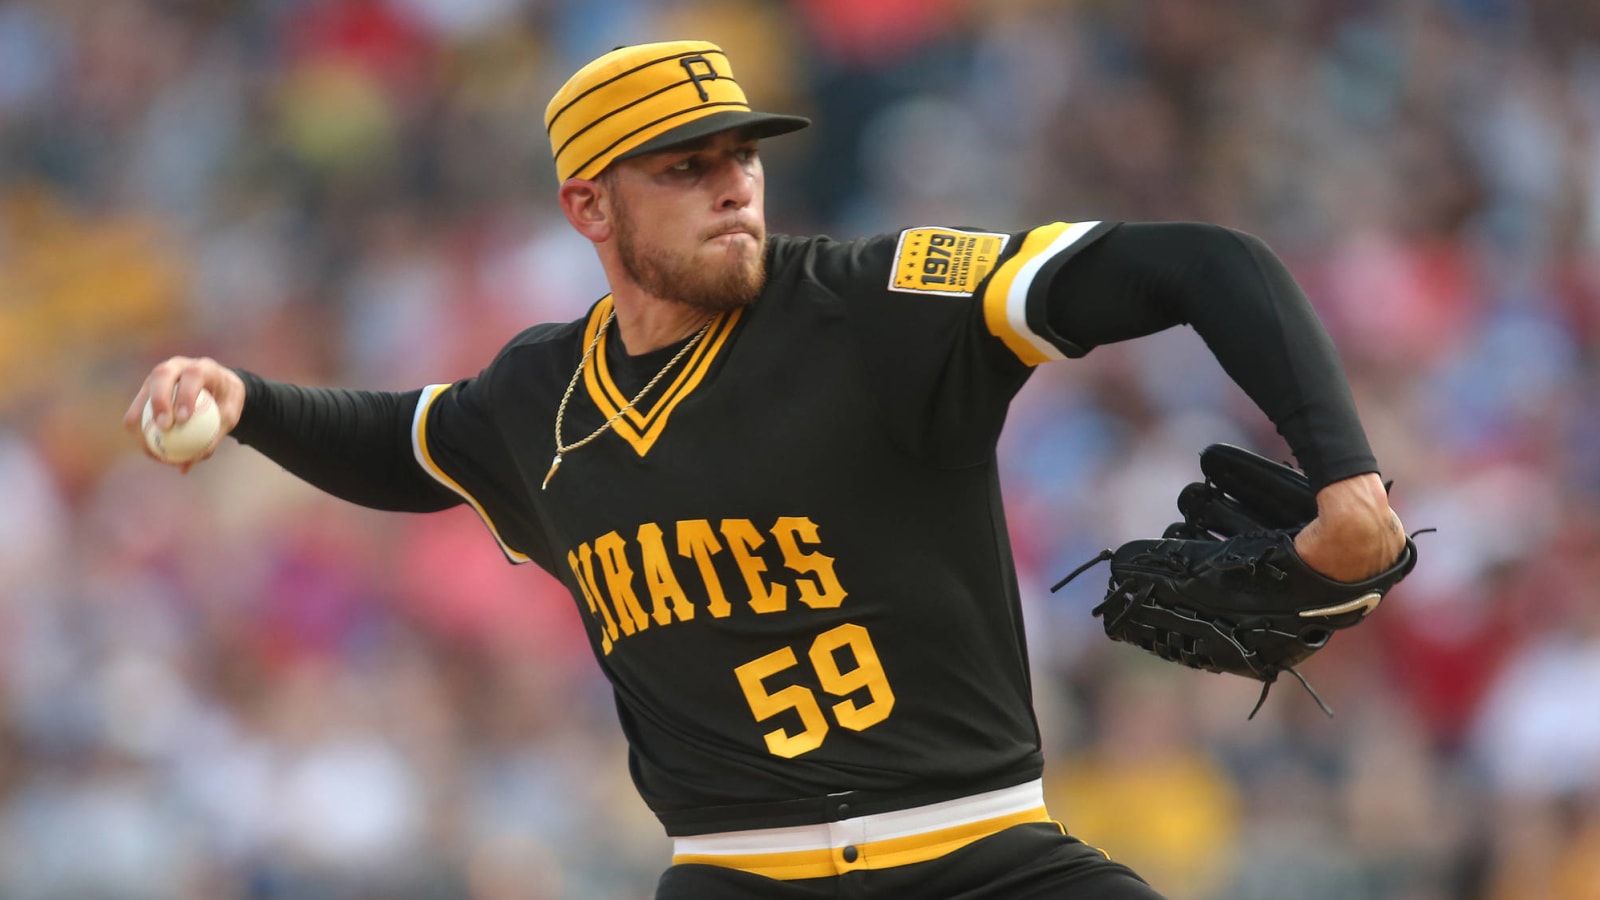 Pirates’ 1979 throwbacks are absolute fire